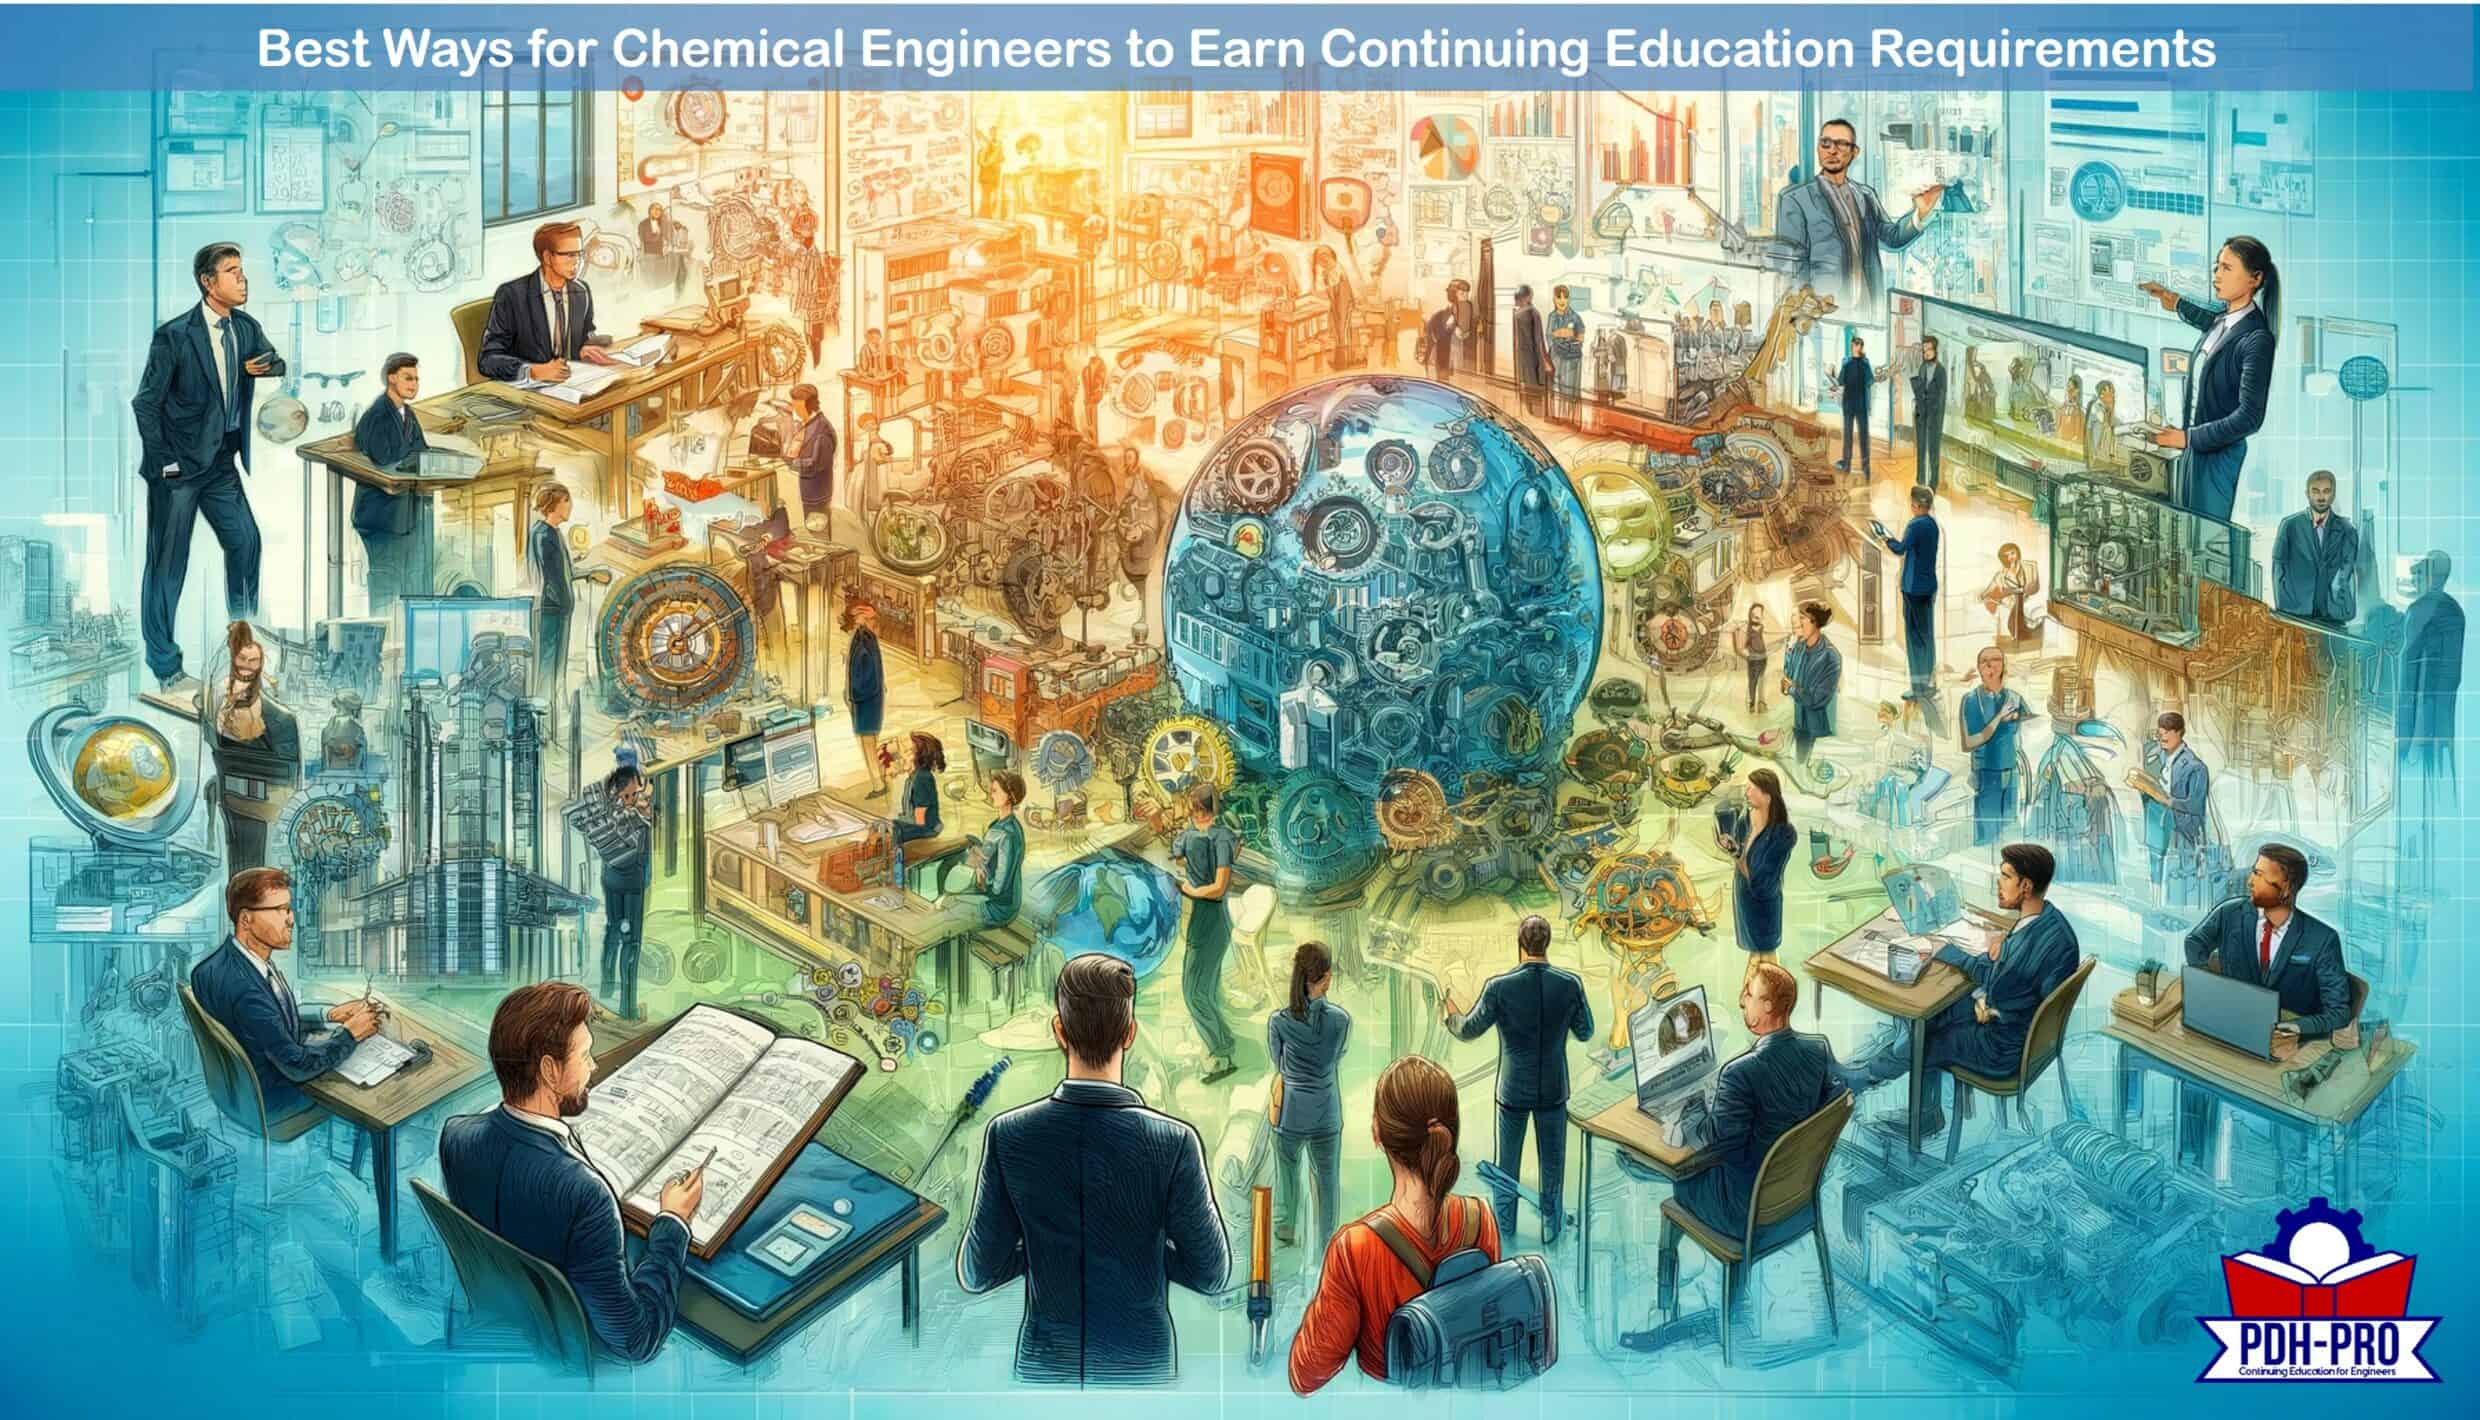 Best Ways for Chemical Engineers to Earn Continuing Education Requirements